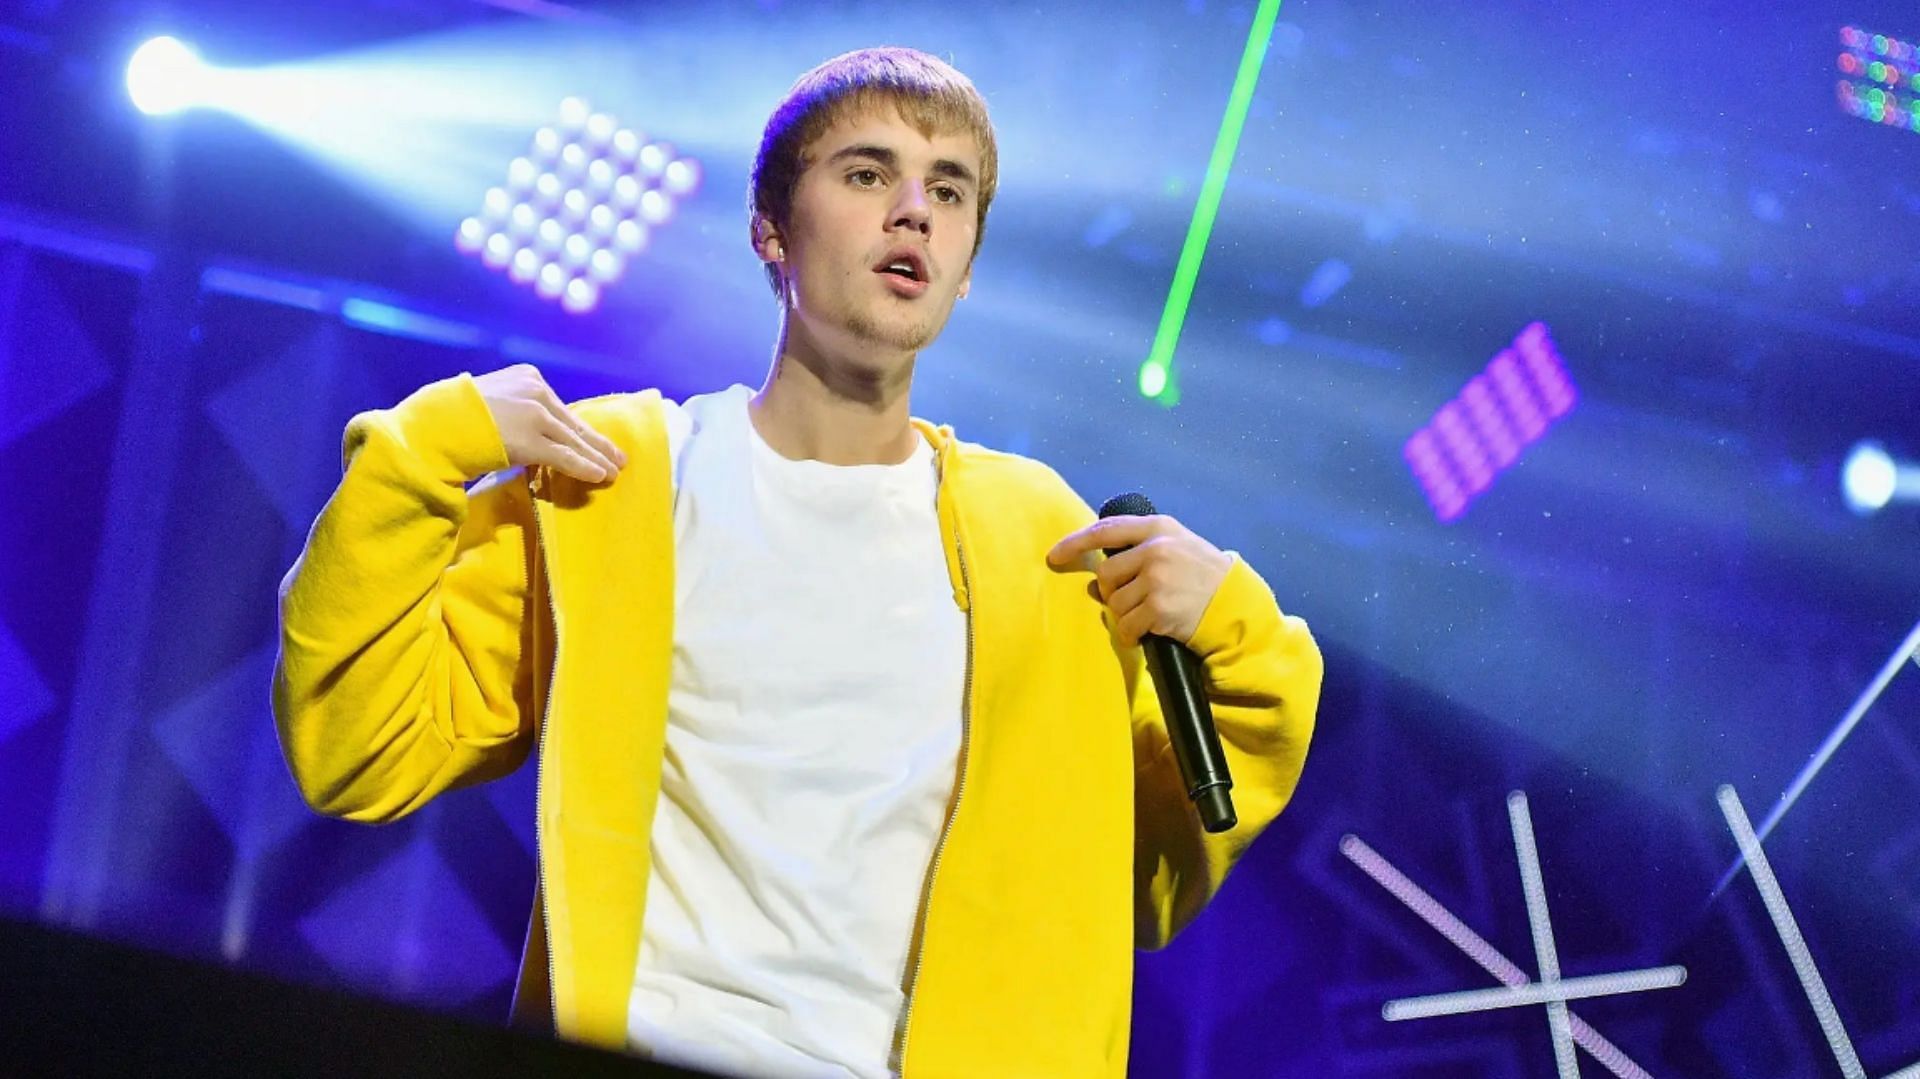 Justin Bieber has postponed his June and early July shows. (Image via Mike Windle / Getty Images)